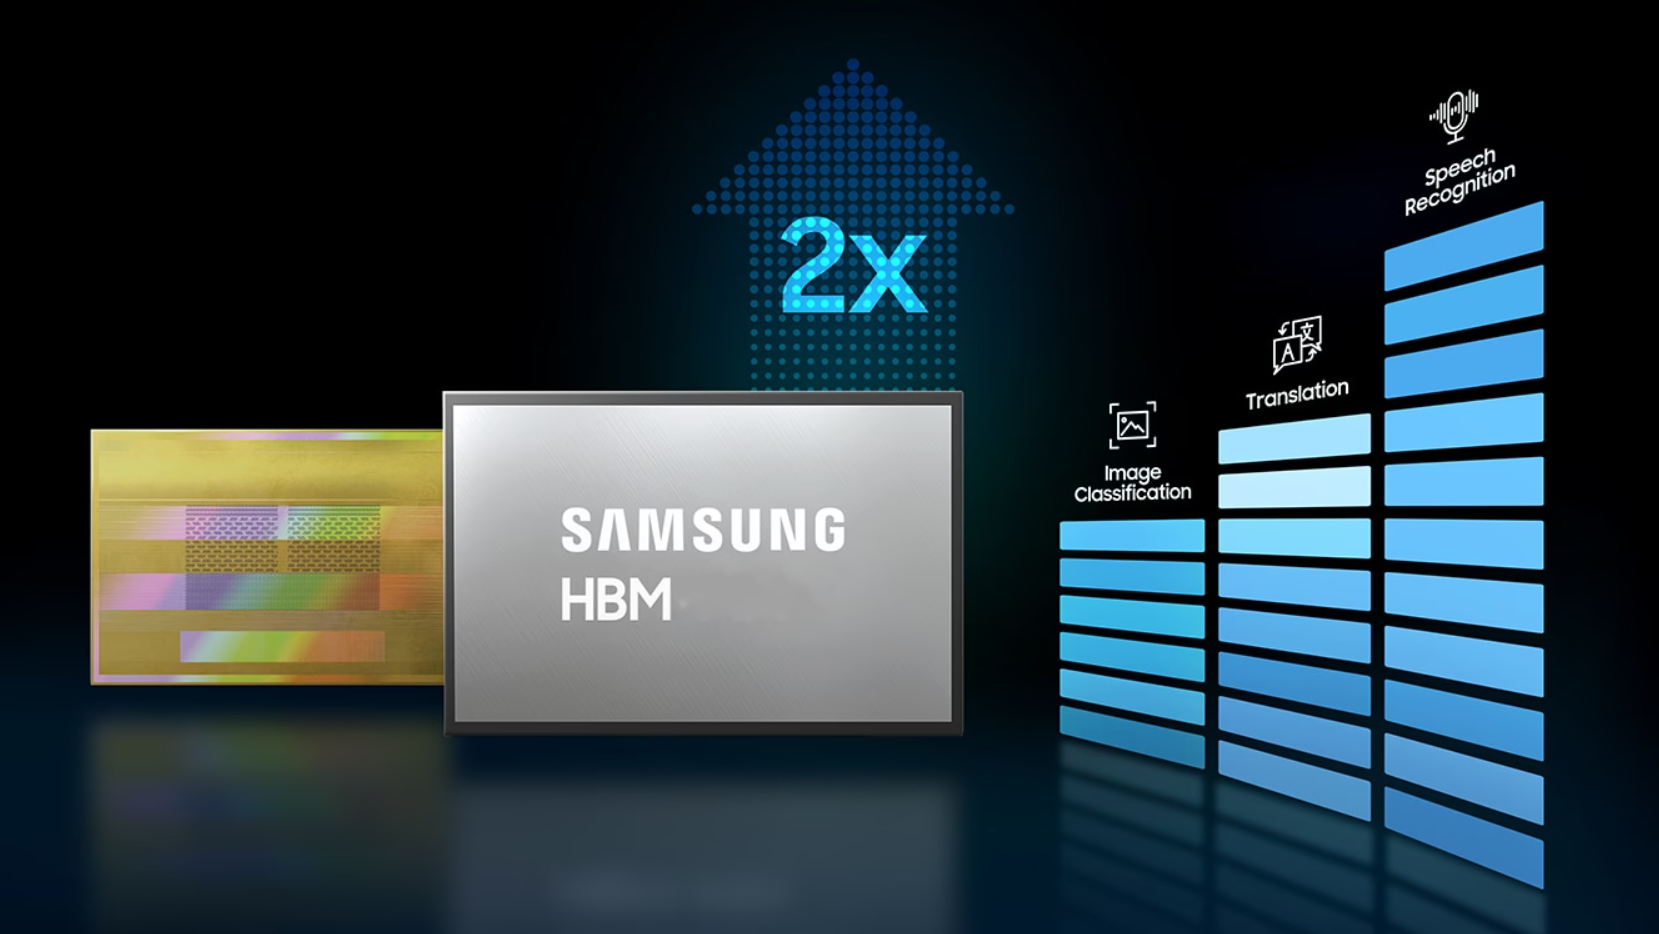 The next generation of HBM4 memory brings significantly greater data transfer, AI will be immeasurably more powerful